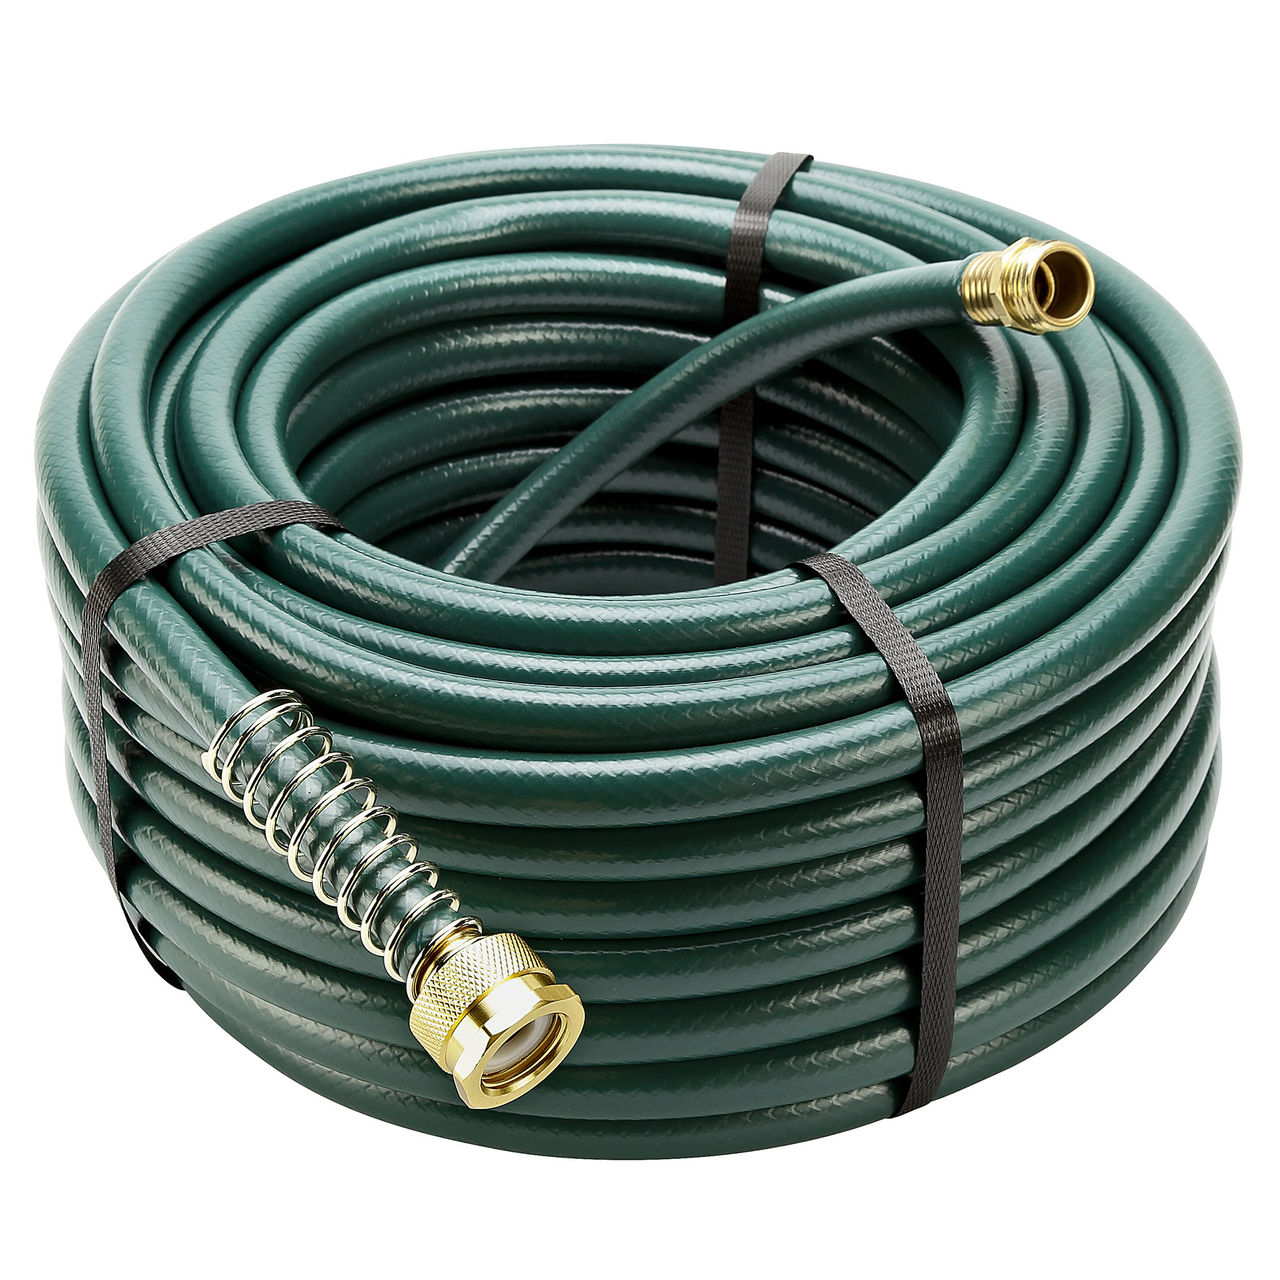 Links to all watering supplies catalog.